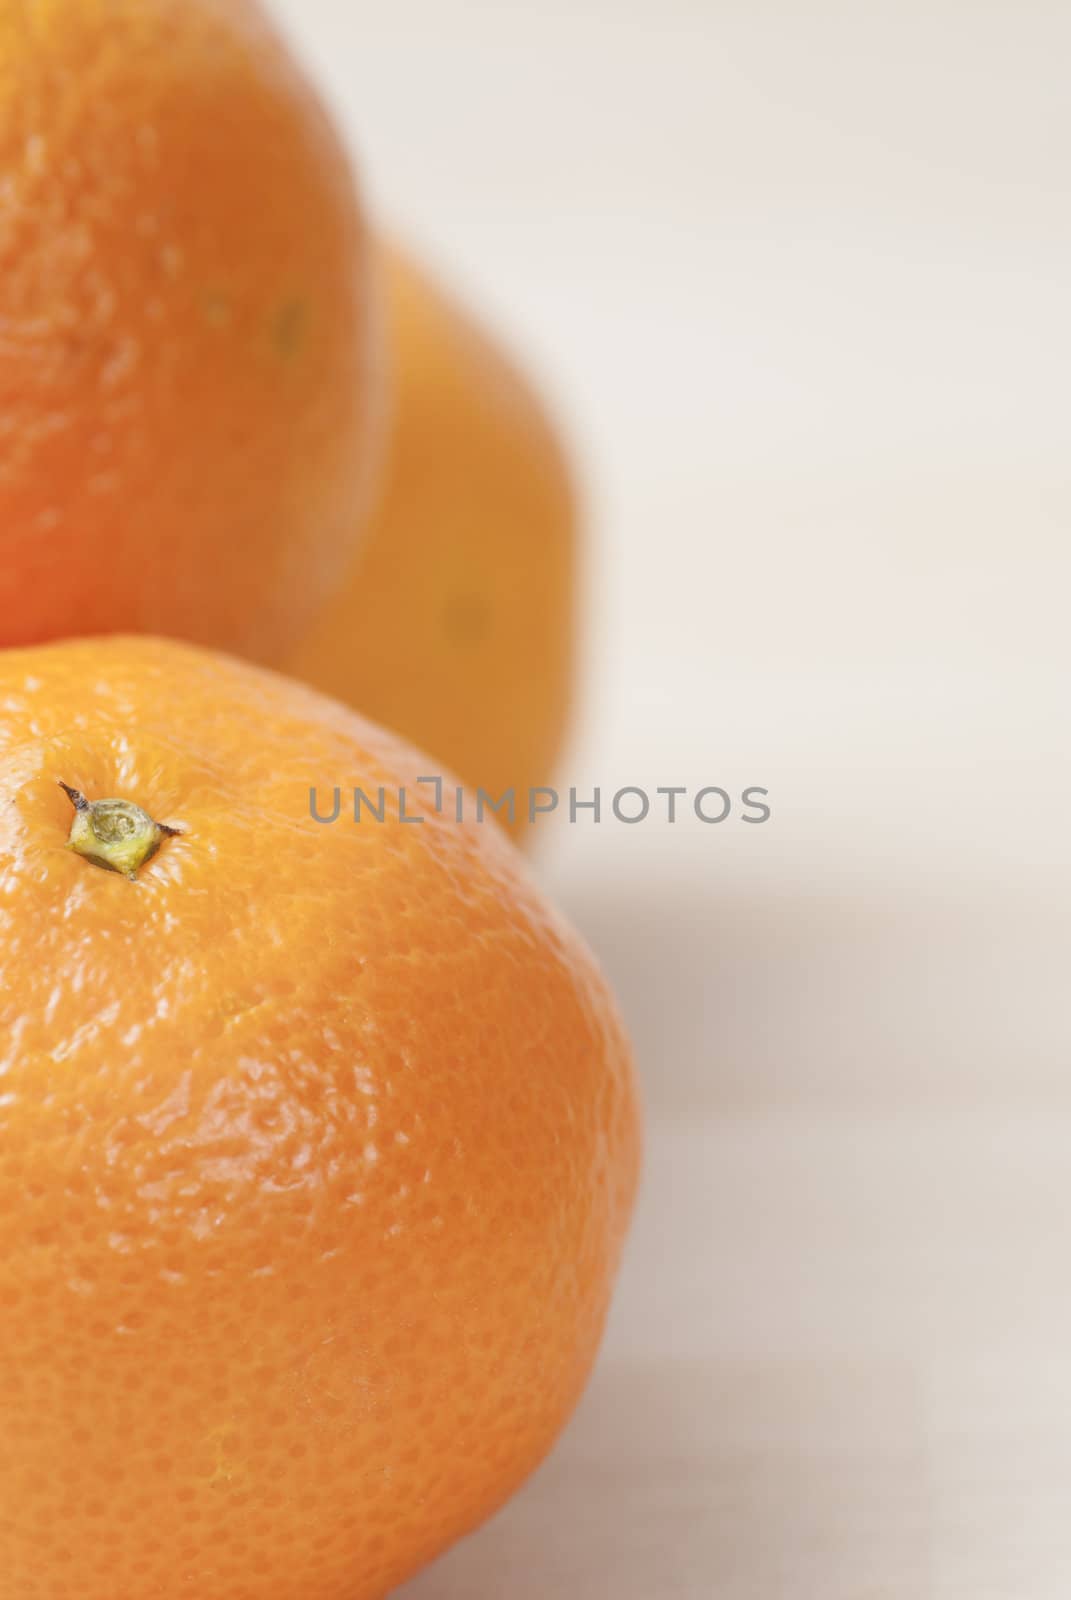 Group of Tangerines on wooden work surface.